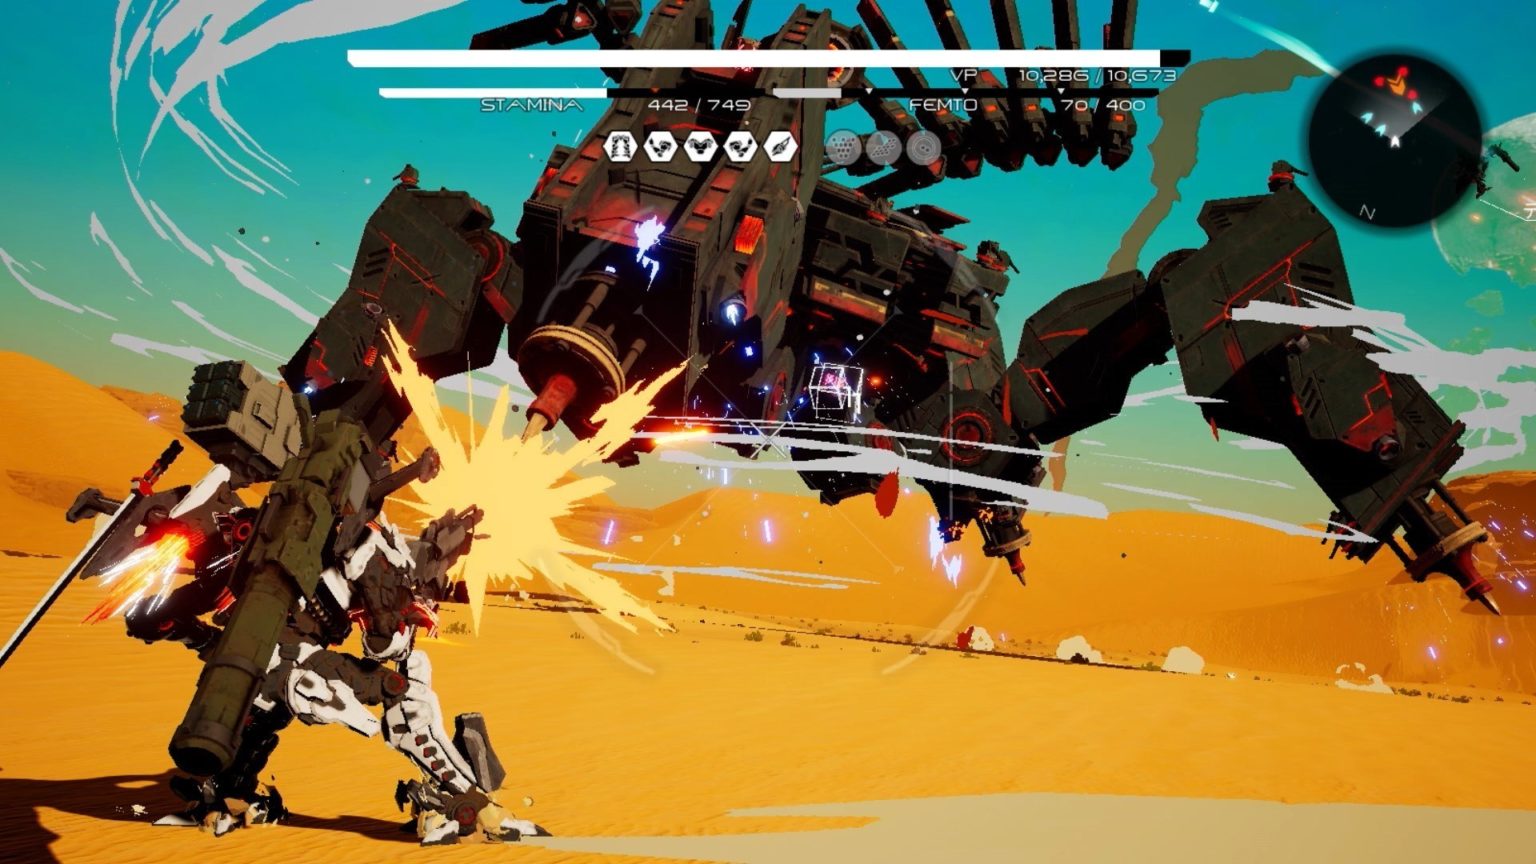 Mech combat action in the upcoming Switch title, Daemon X Machina